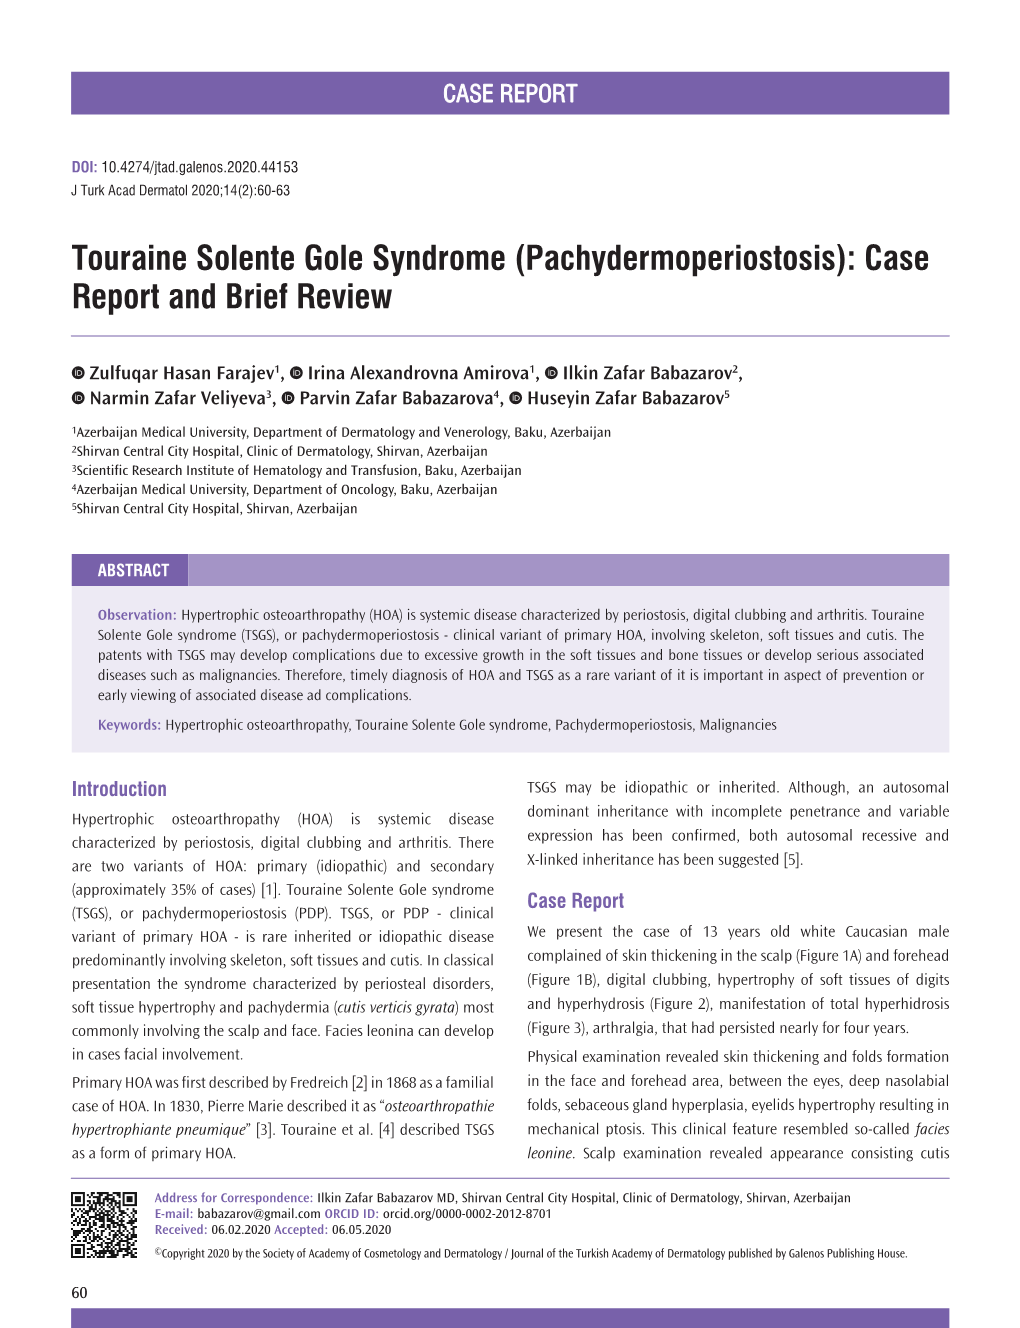 Touraine Solente Gole Syndrome (Pachydermoperiostosis): Case Report and Brief Review